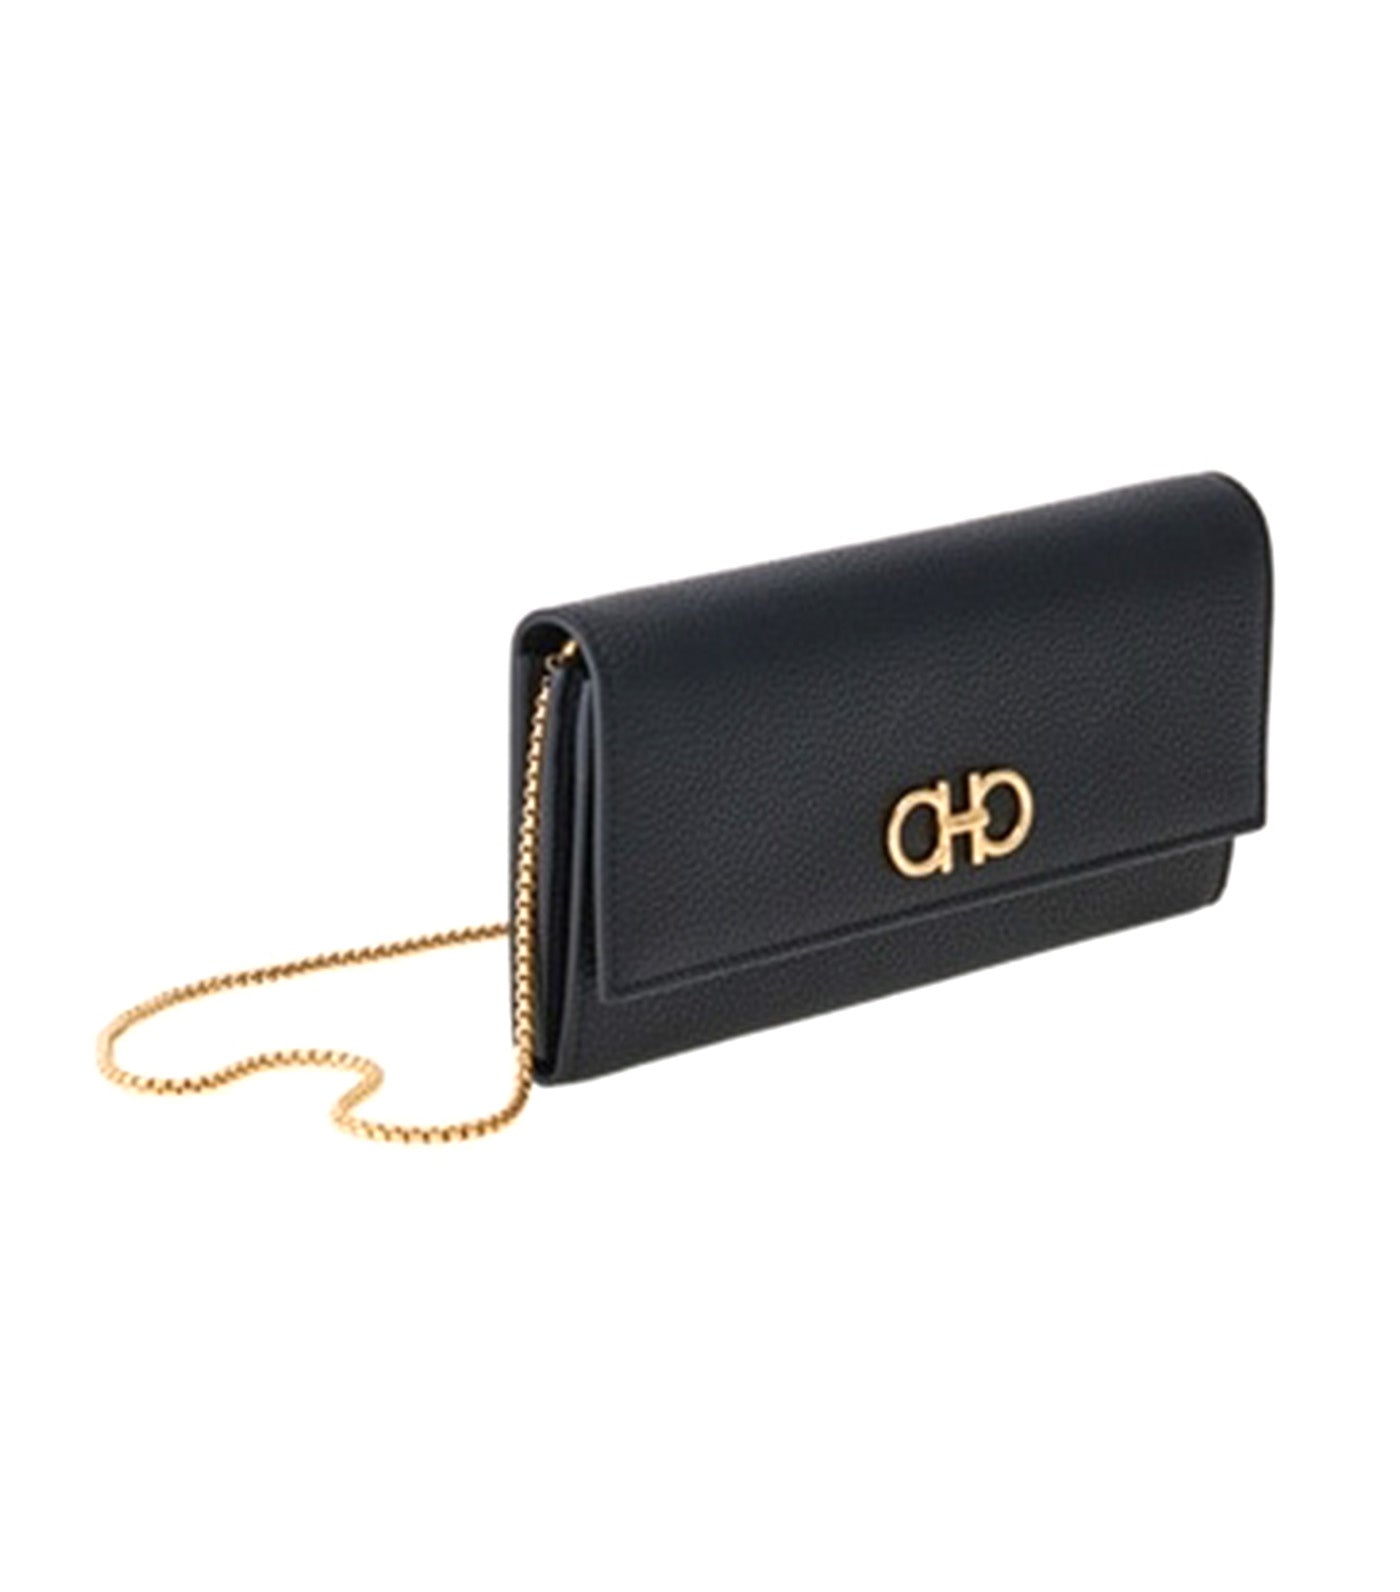 Gancini Wallet with Chain Black